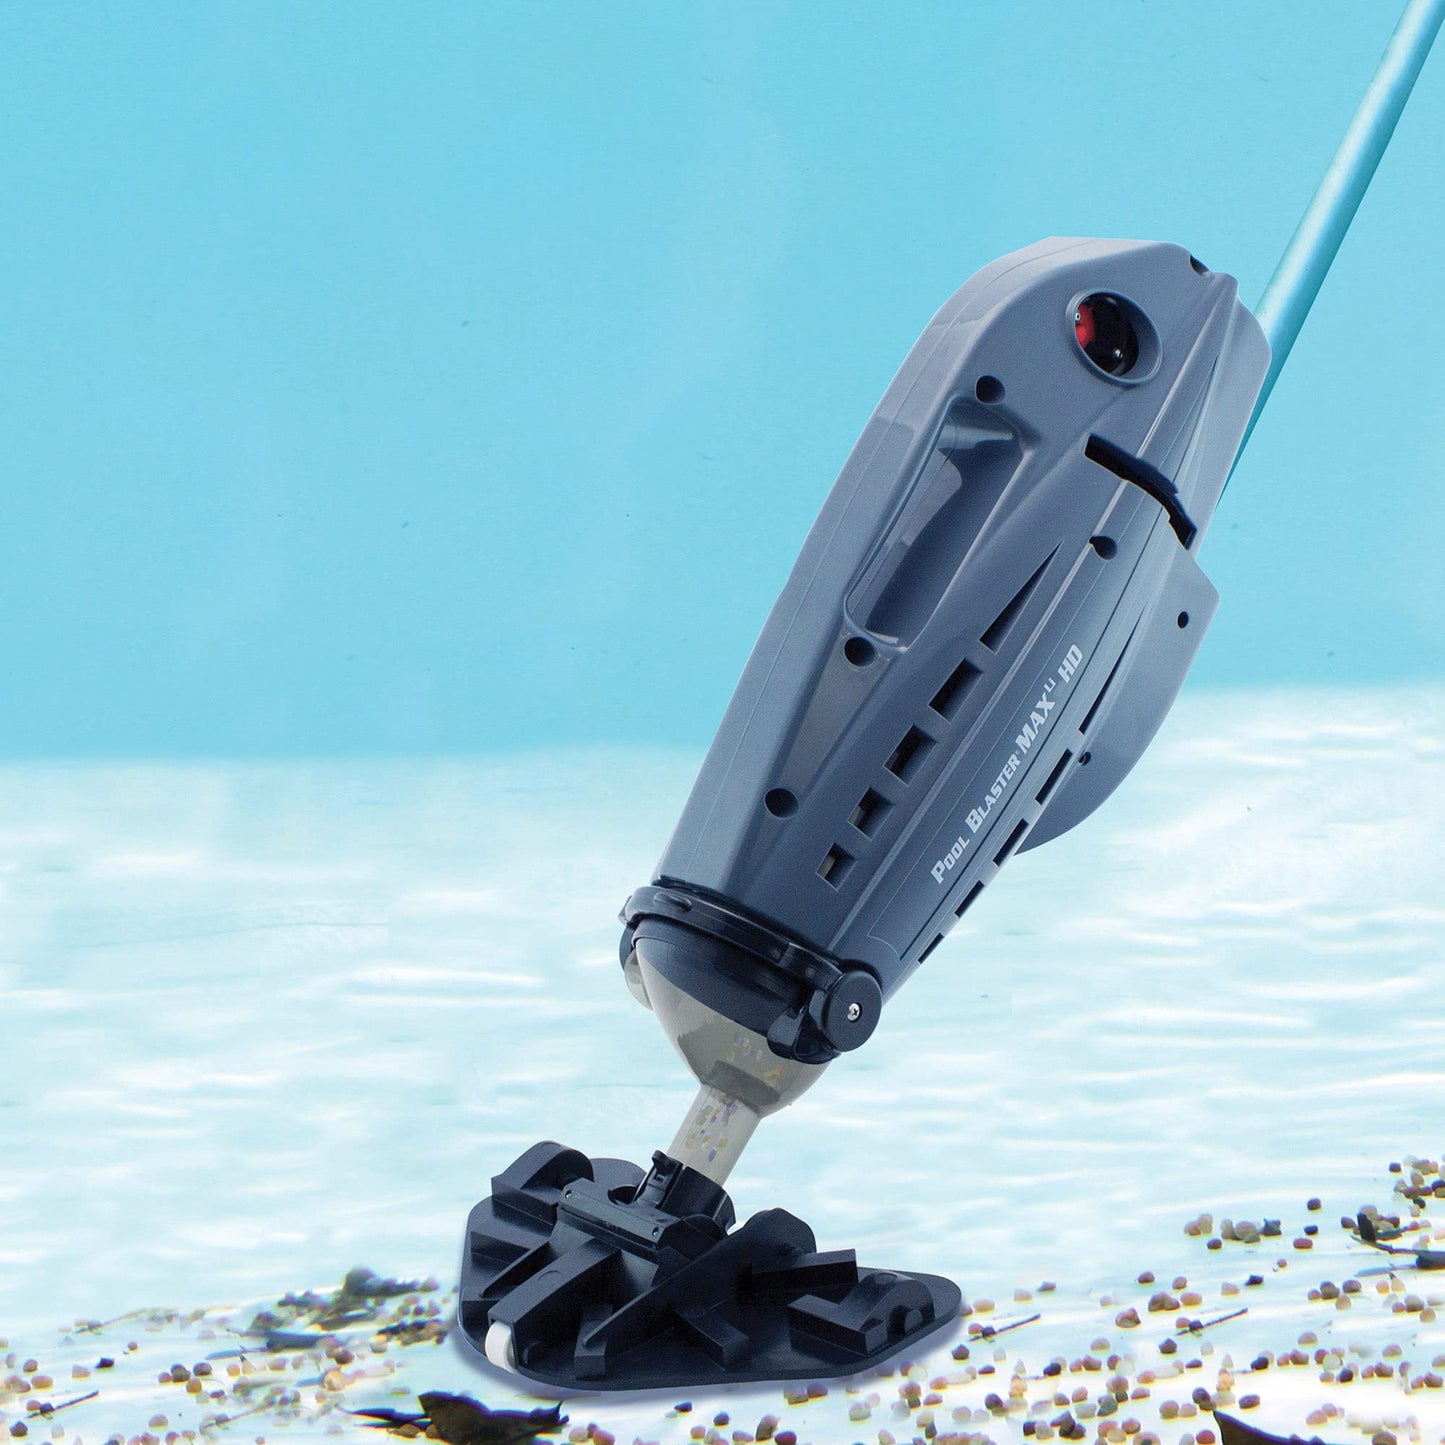 POOL BLASTER Max HD Cordless Pool Vacuum - Heavy-Duty Cleaning with High Capacity, Handheld Rechargeable Swimming Pool Cleaner for Inground & Above Ground Pool, Hoseless Design by Water Tech